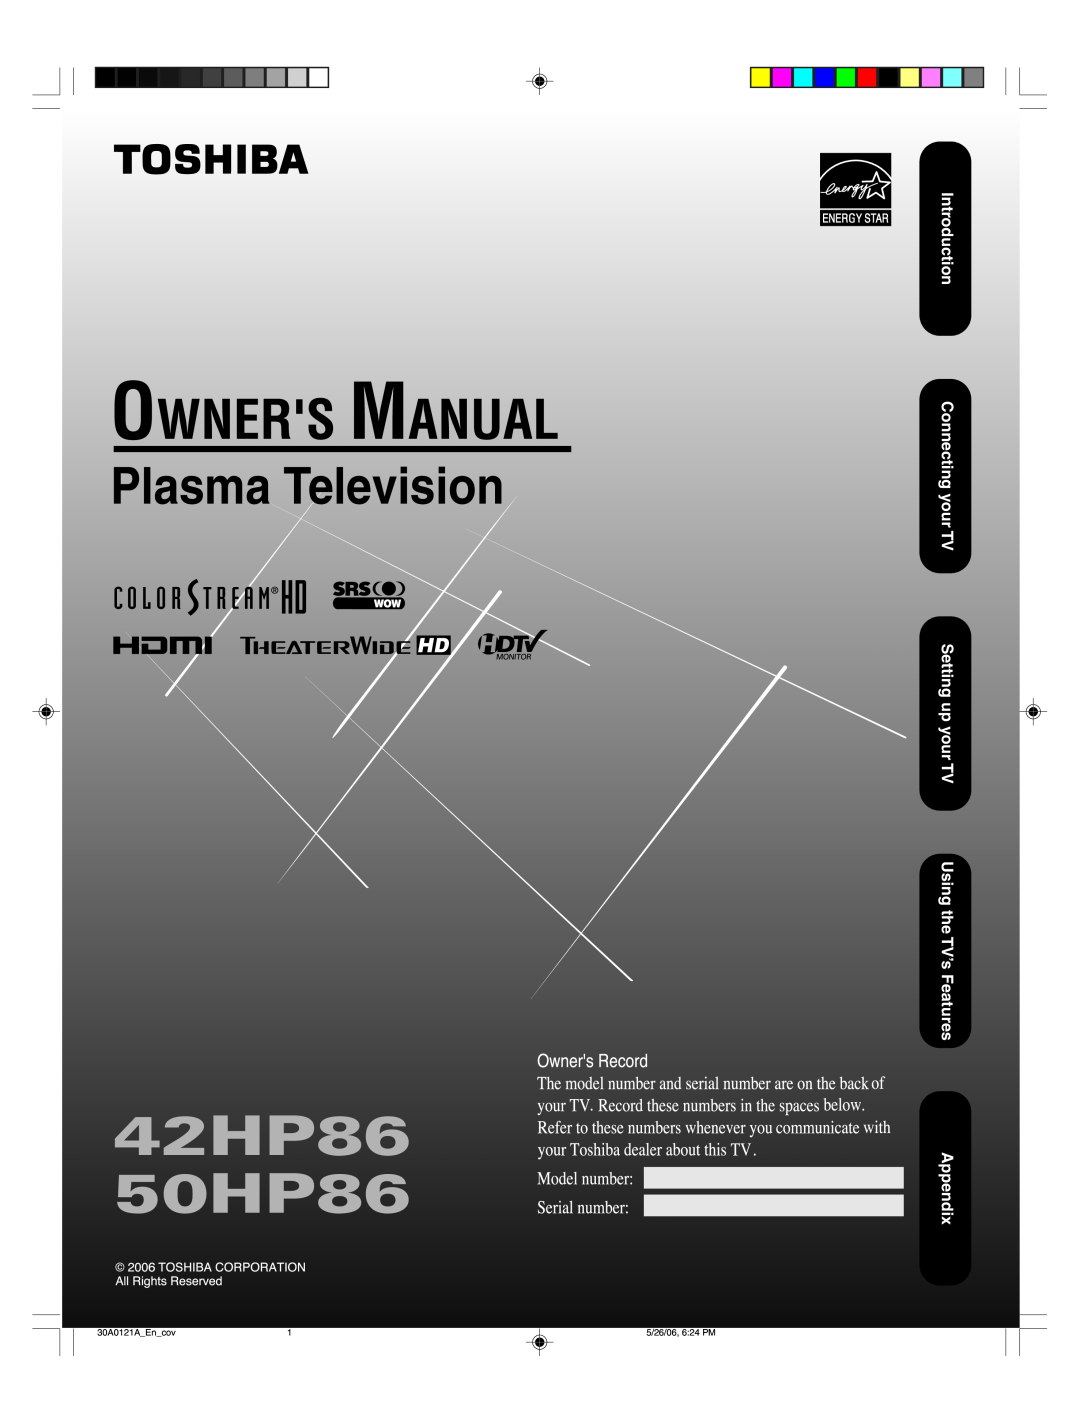 Toshiba appendix 42HP86 50HP86, Plasma Television, Introduction Connecting your TV Setting up your TV, 30A0121AEncov 